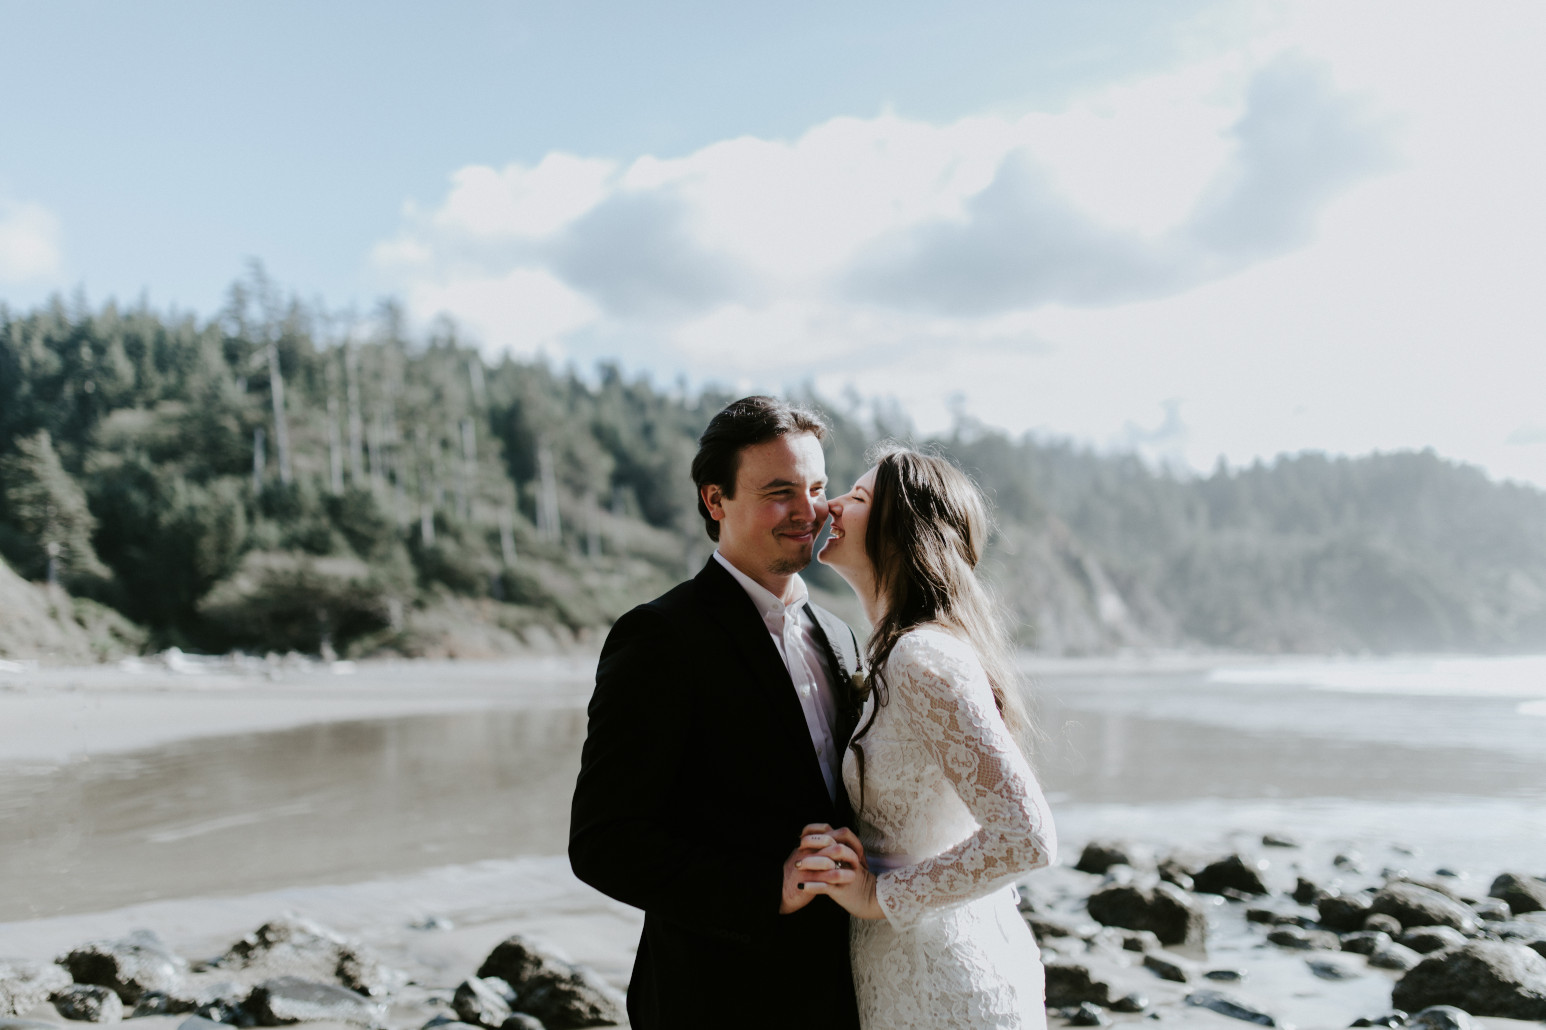 Nicole and Vlad standing on the sand. Elopement wedding photography at Cannon Beach by Sienna Plus Josh.